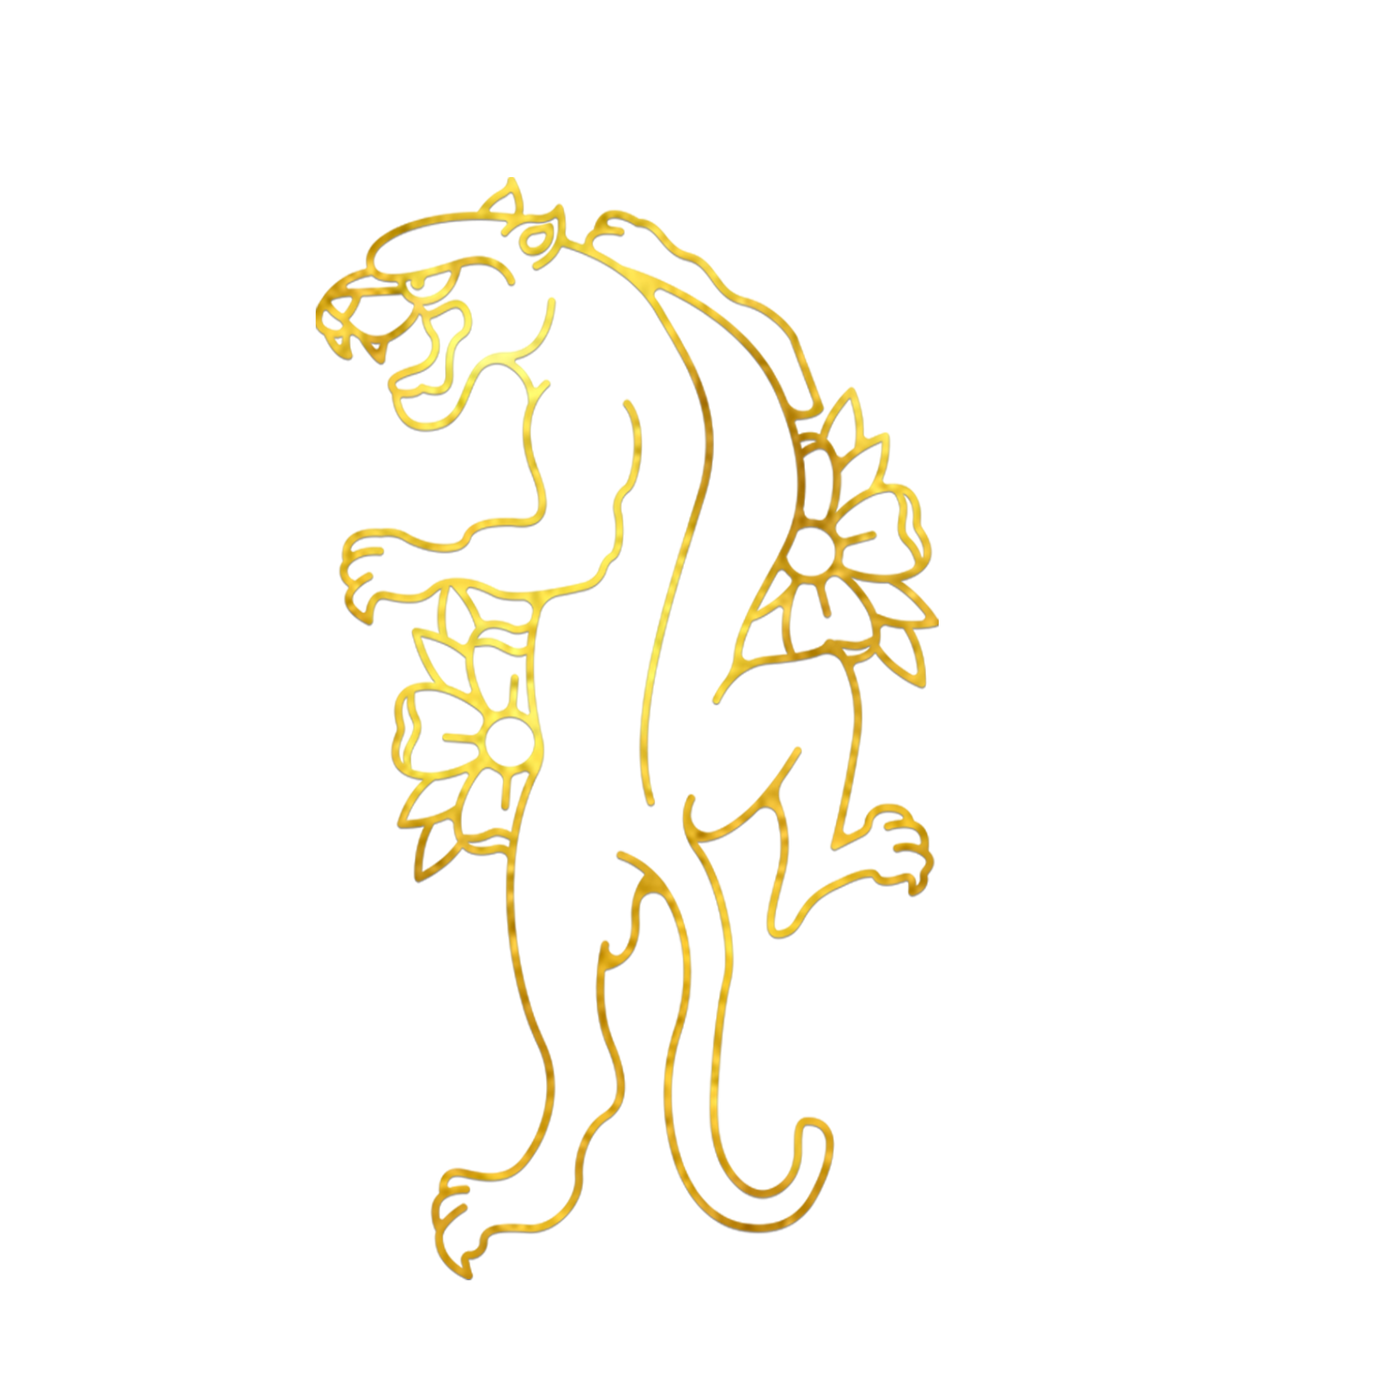 Panther Gold Foil Decal